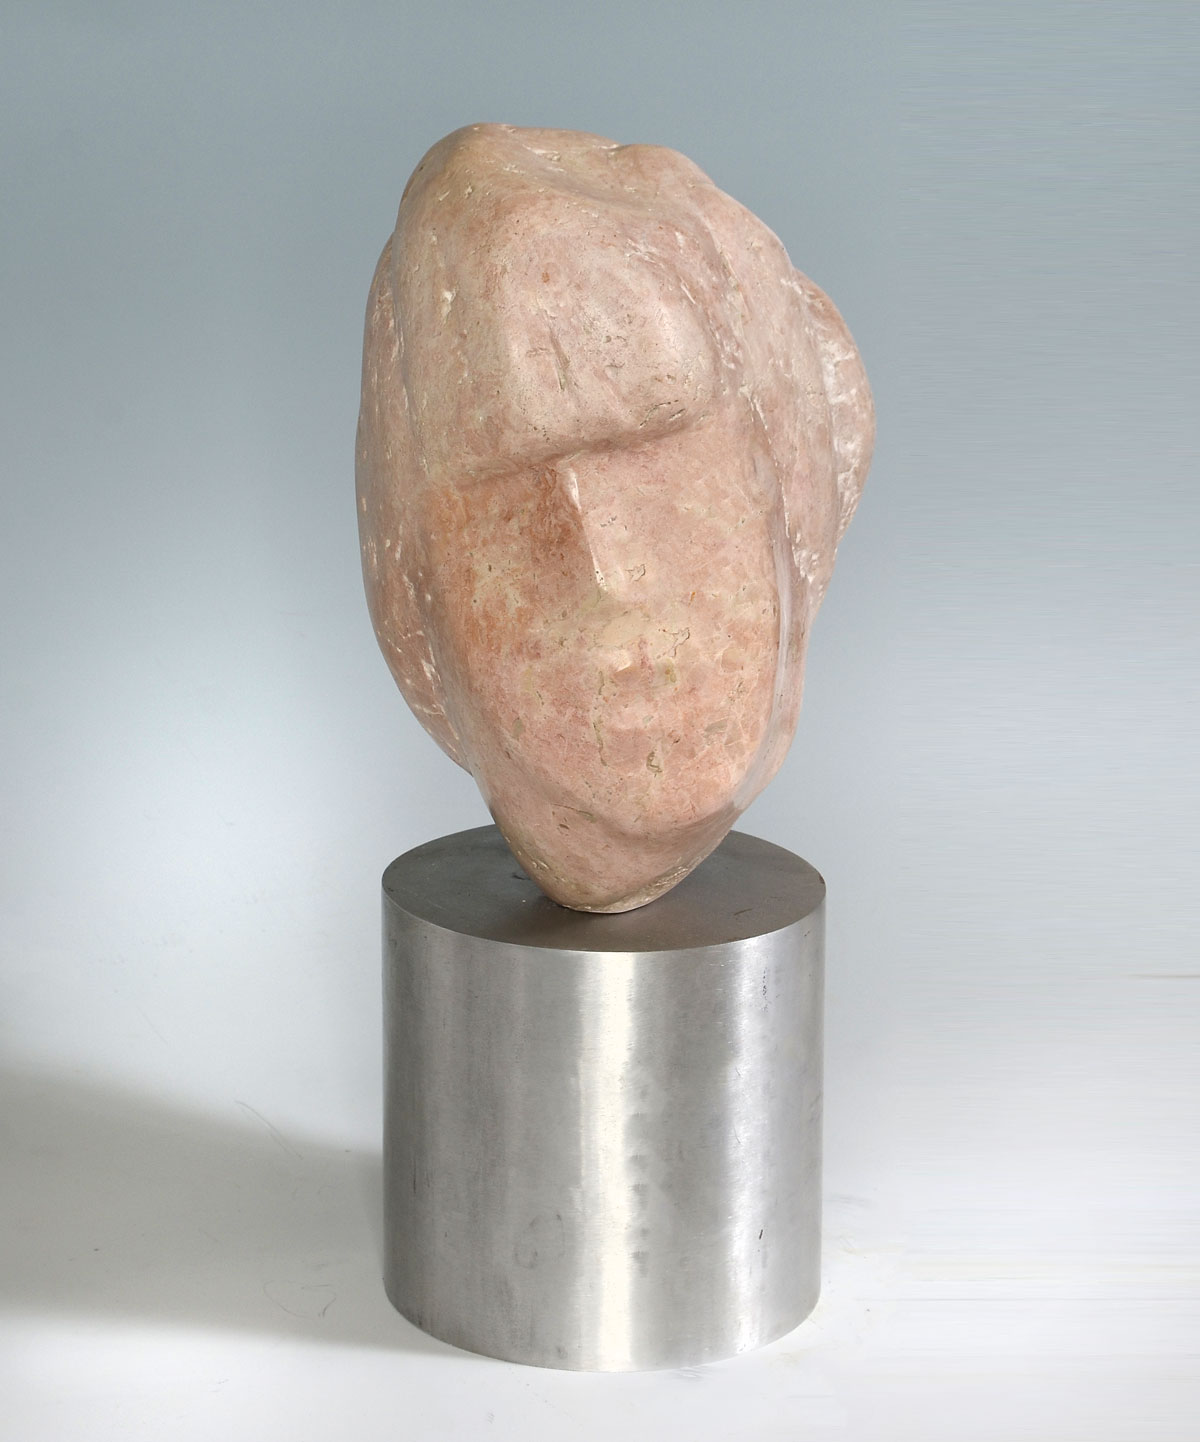 CUICA, Eugen, (): Abstract Human Head,